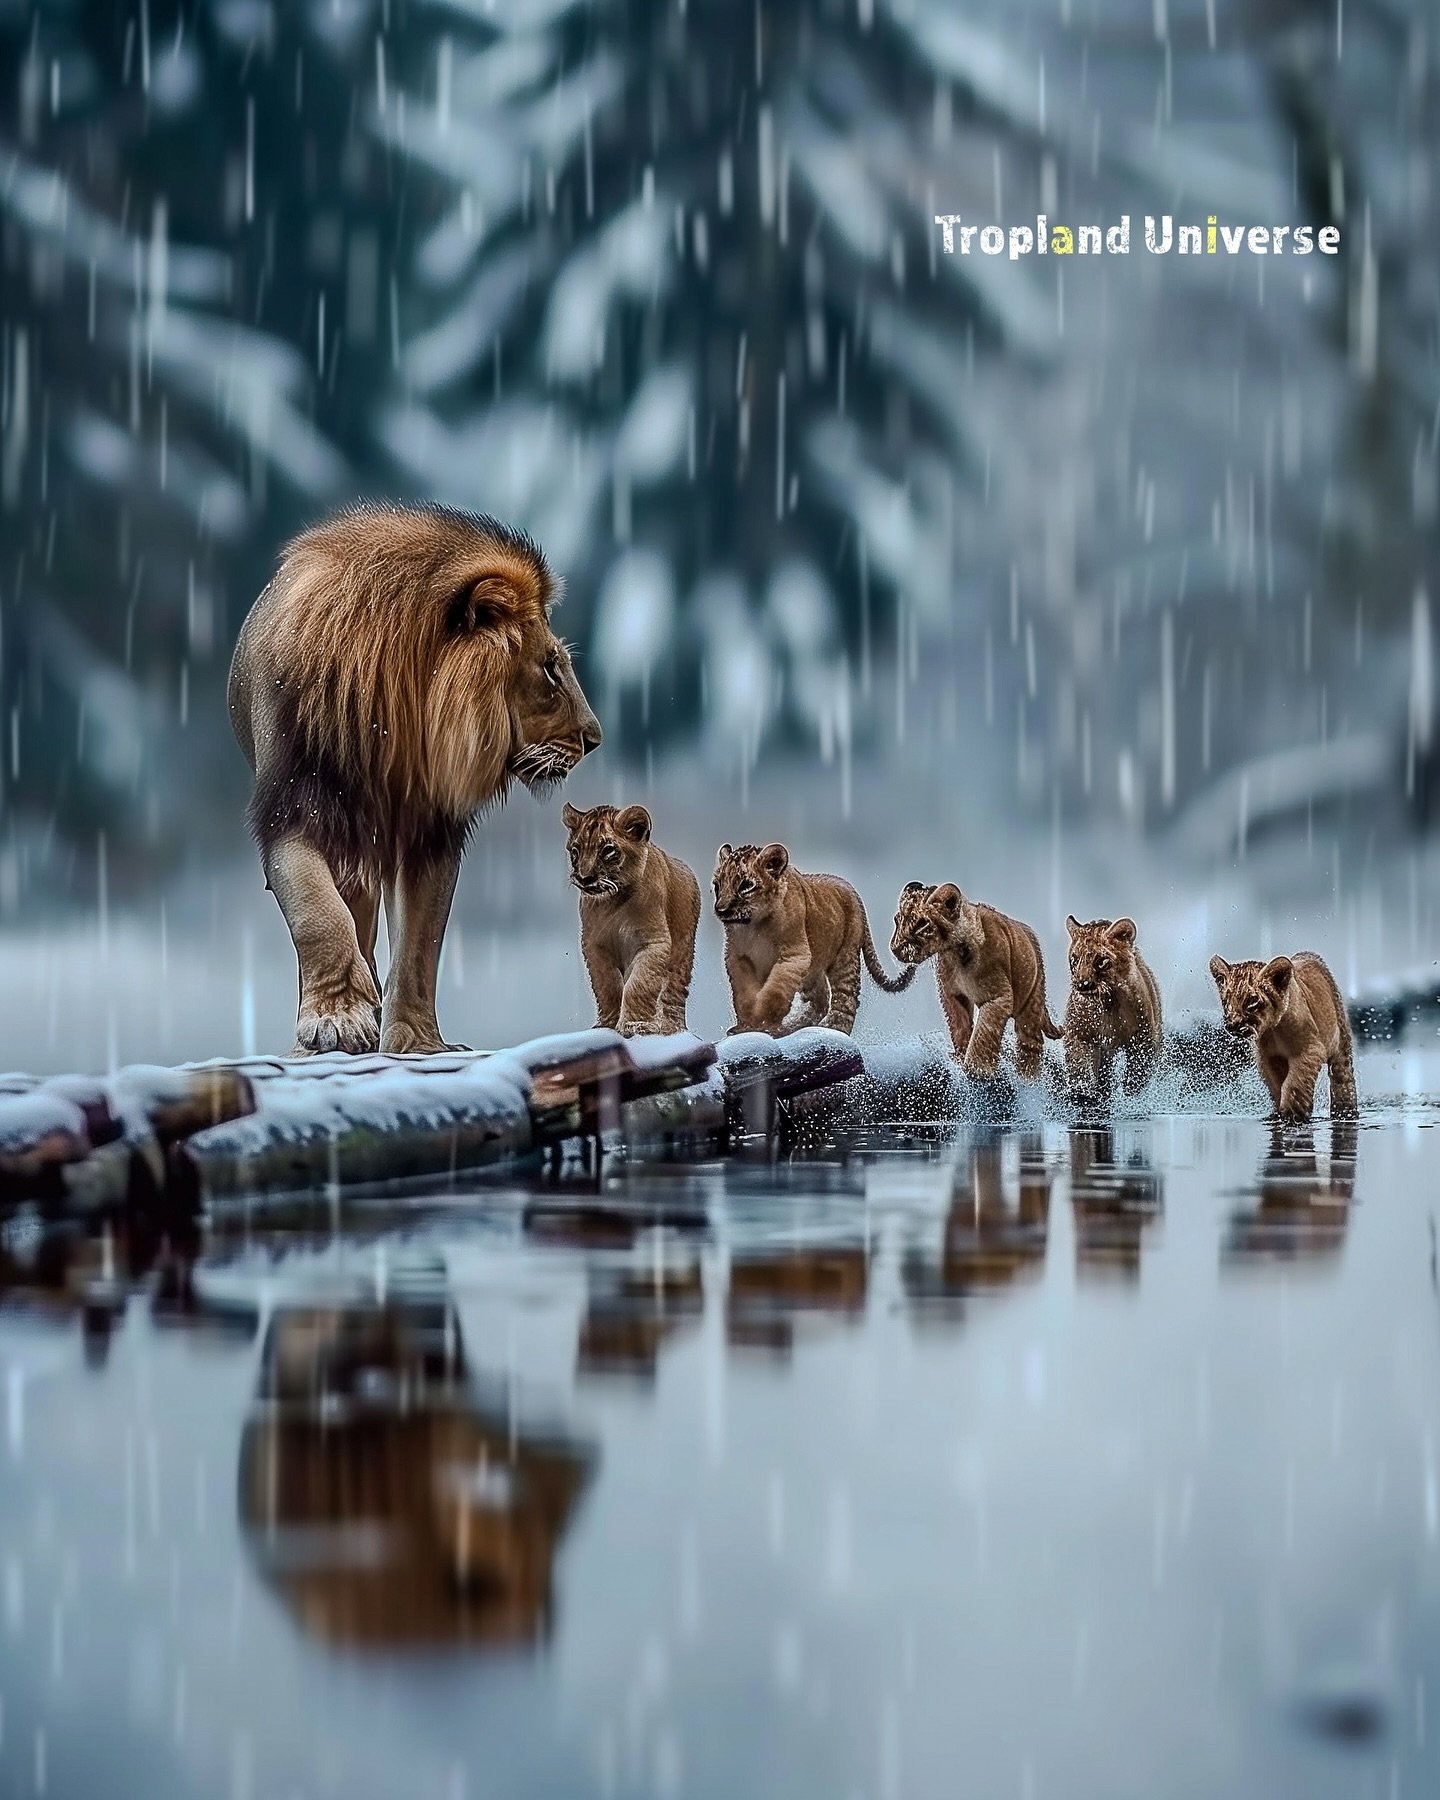 The champ and his squad. 💖🦁 What would you like to see next? Comment and let me know. 

🦁 Be sure to follow me @troplanduniverse for more just like this post. 

📸 This is not an actual photo. Lions were crafted using generative AI, Photoshop, and